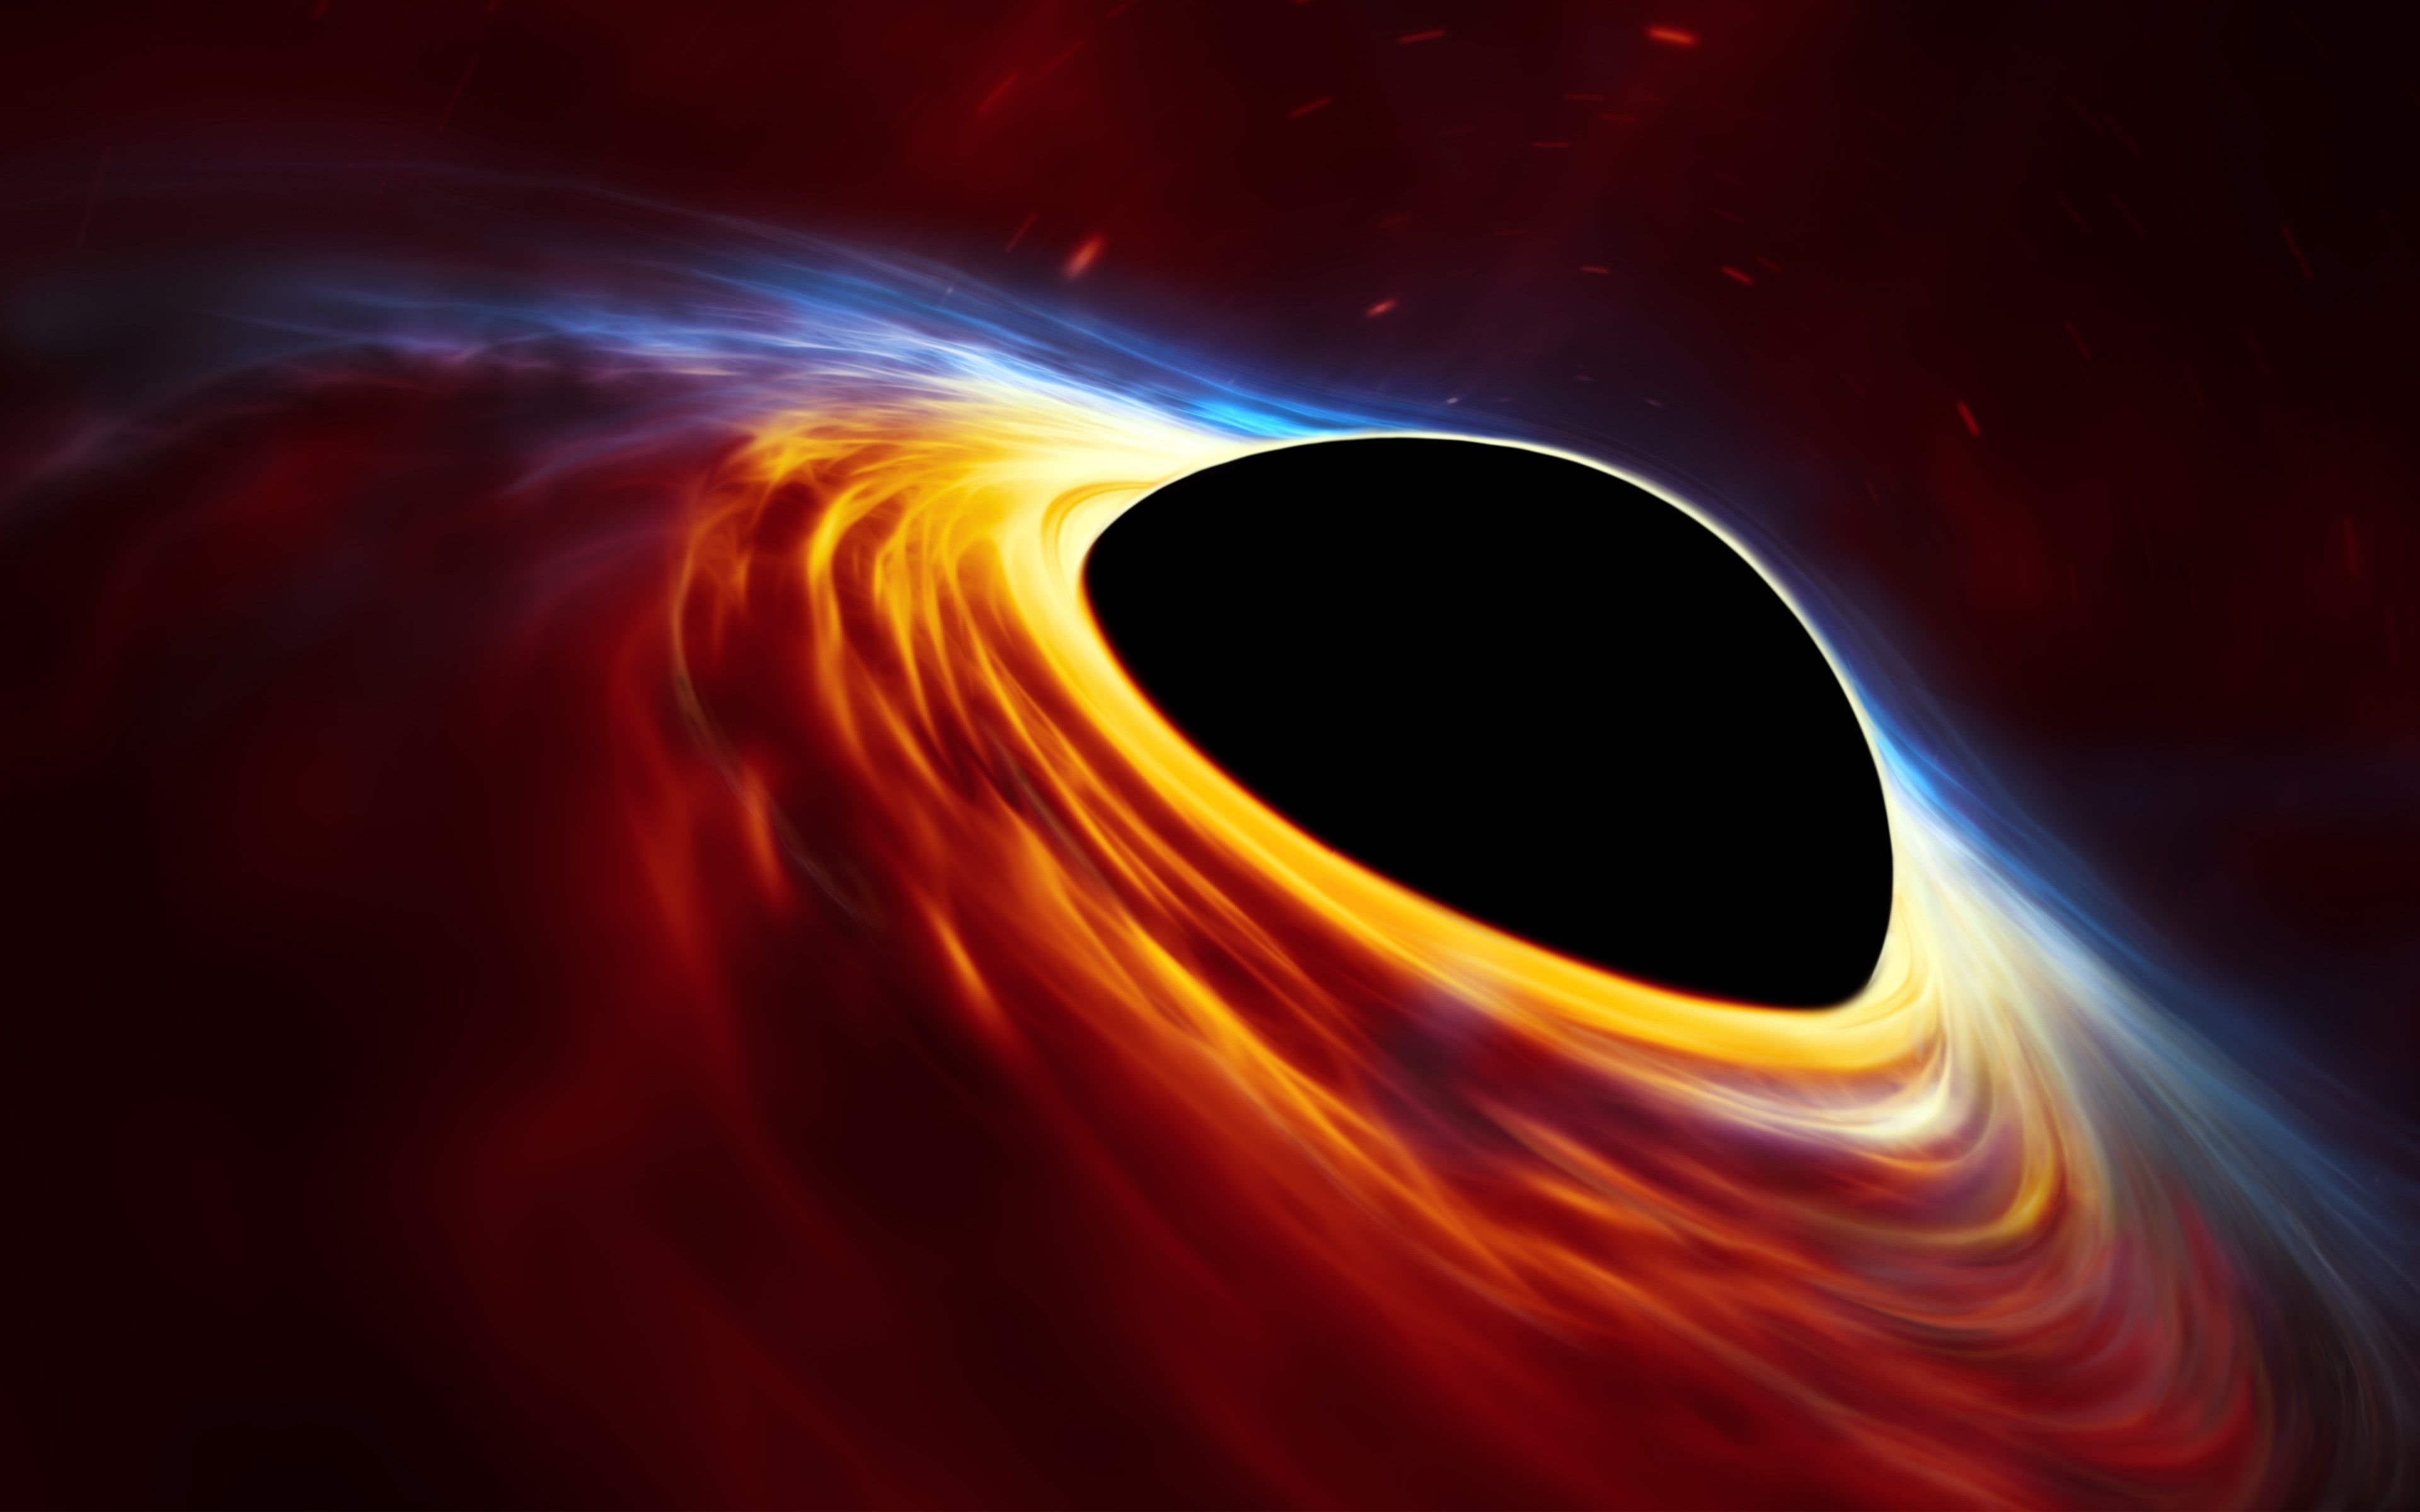 4K Wallpaper Space, Space Stars Black Hole 4k Wallpaper 4 758 wallpaper awesome collection for pc, laptop, apple, android phone and tablet